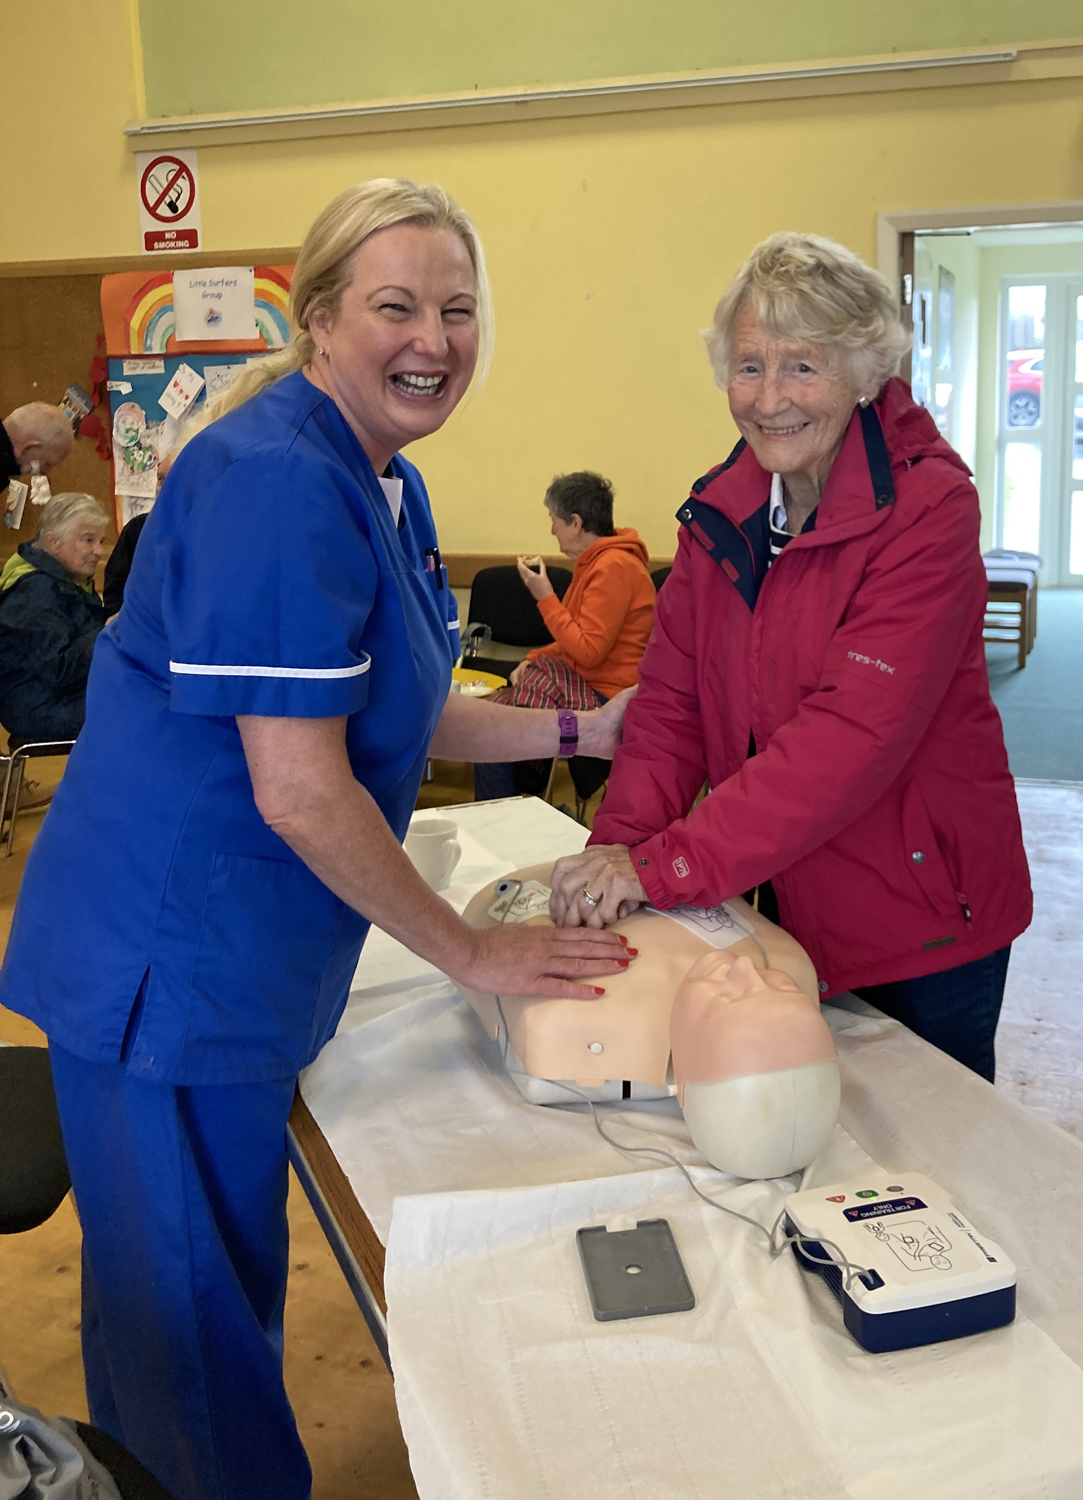 Denise Stone offers advice on use of a defibrillator at the Agherton Parish health and wellbeing event.